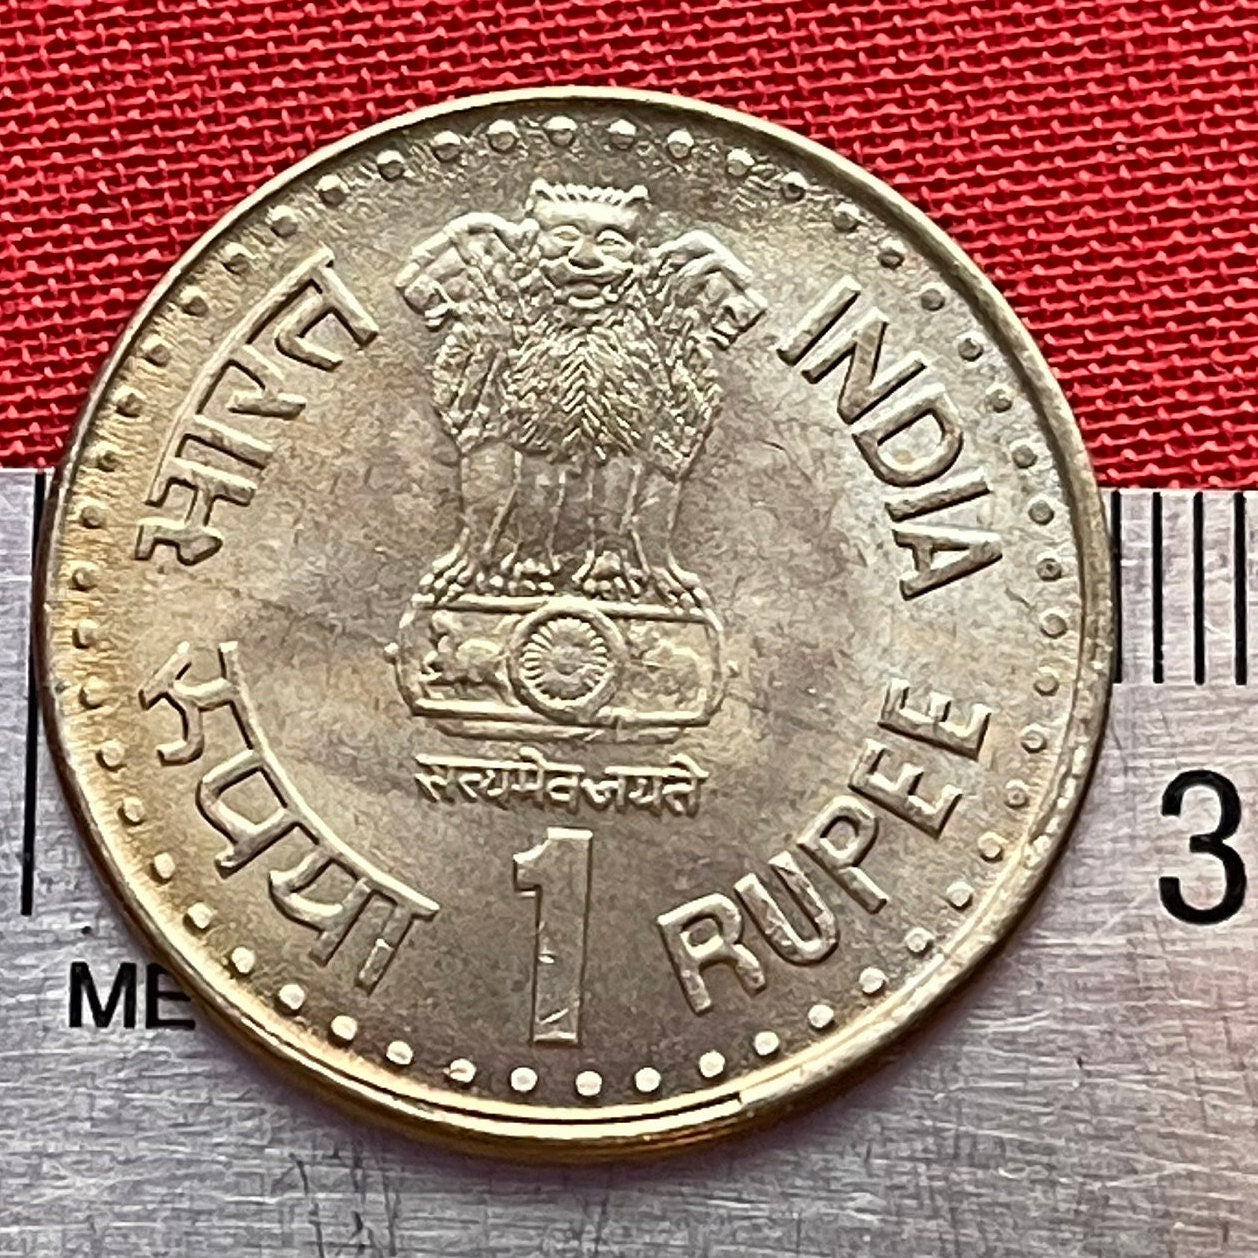 Martyr's Memorial & Ashoka Lion Capitol 1 Rupee India Authentic Coin Money for Jewelry and Craft Making